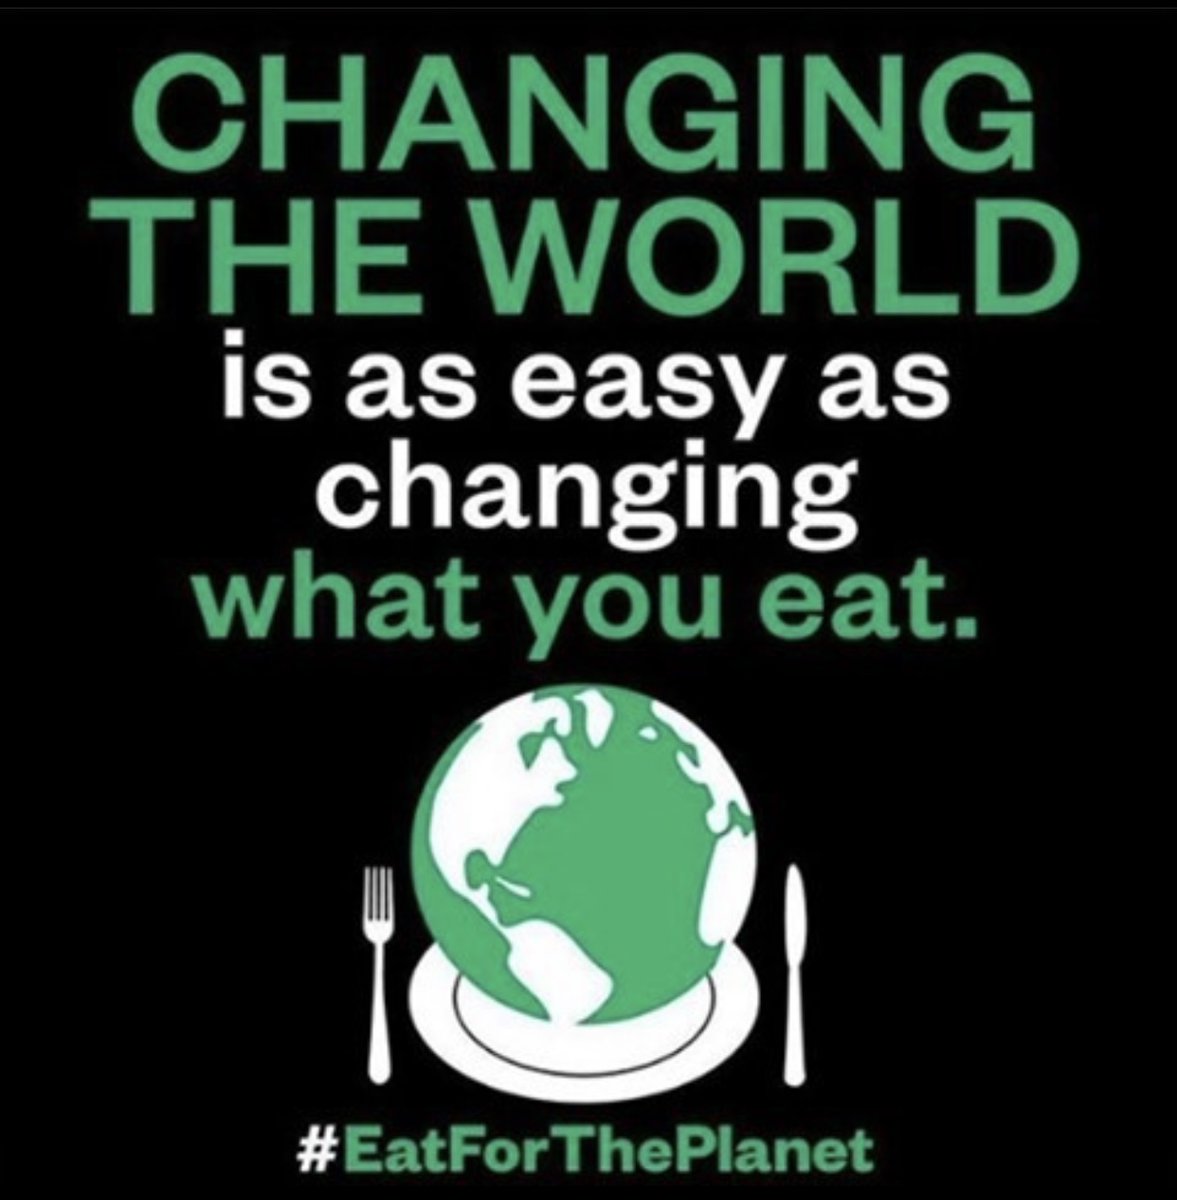 Changing the world is as easy as changing what you eat. #EatForThePlanet #GoVegan